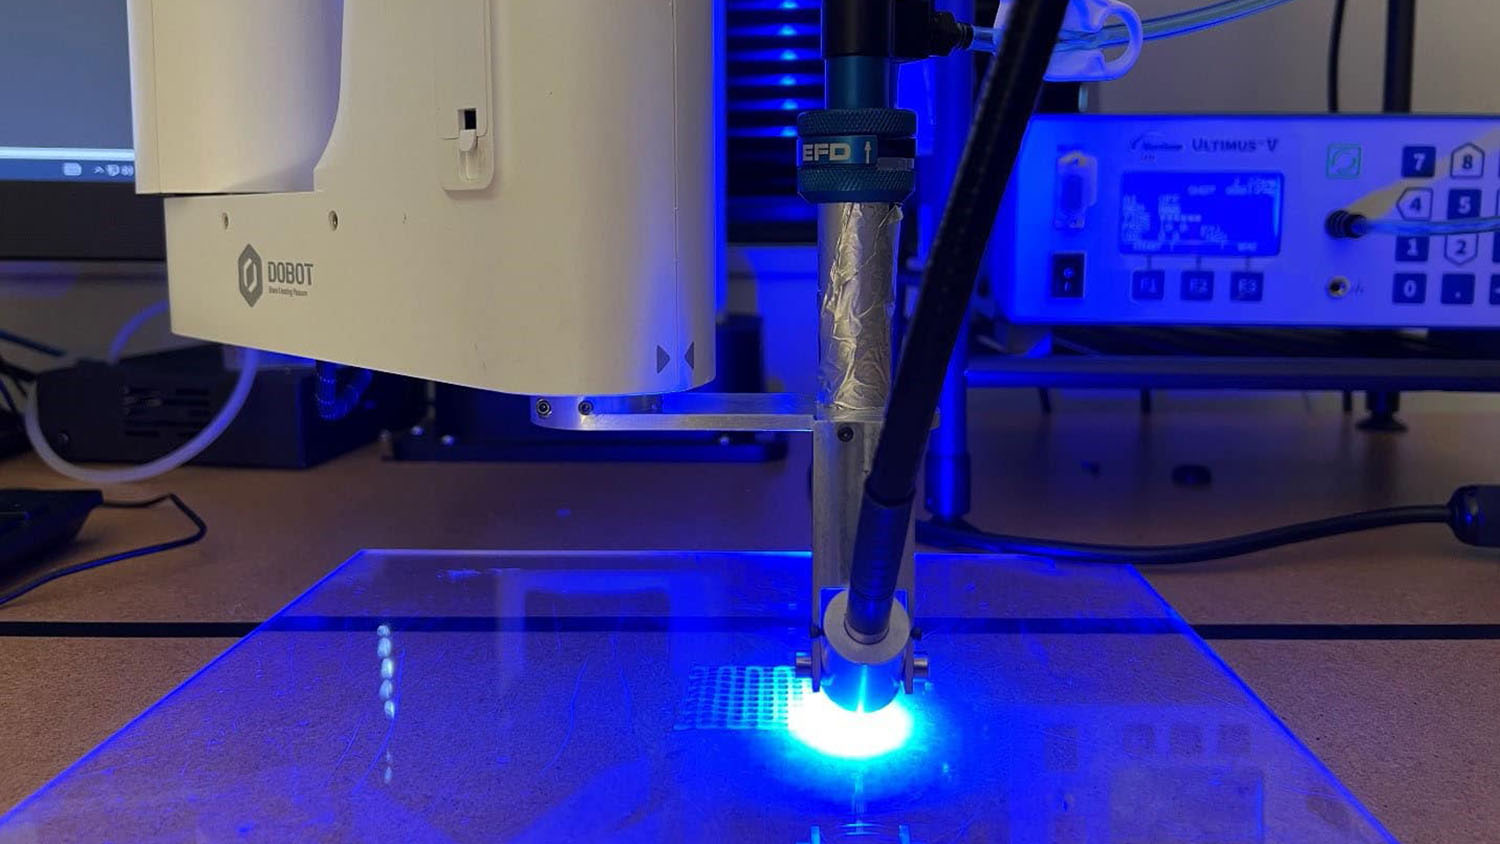 Surrounded in a blue glow with a white light at center, a 3D printer is in the process of producing a carbon dioxide filter.